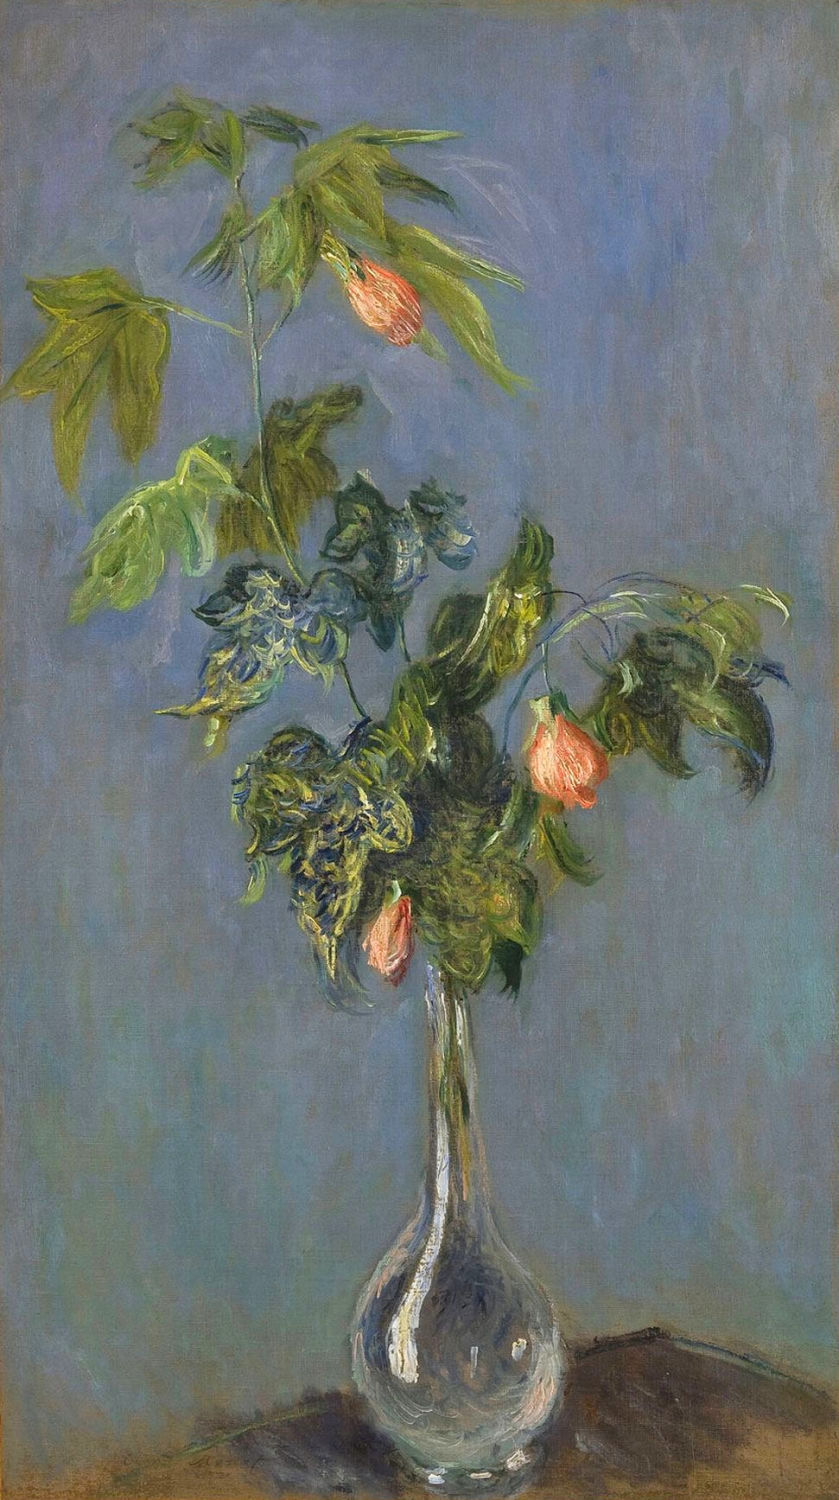 Flowers in a Vase, 1882 - Claude Monet - WikiArt.org